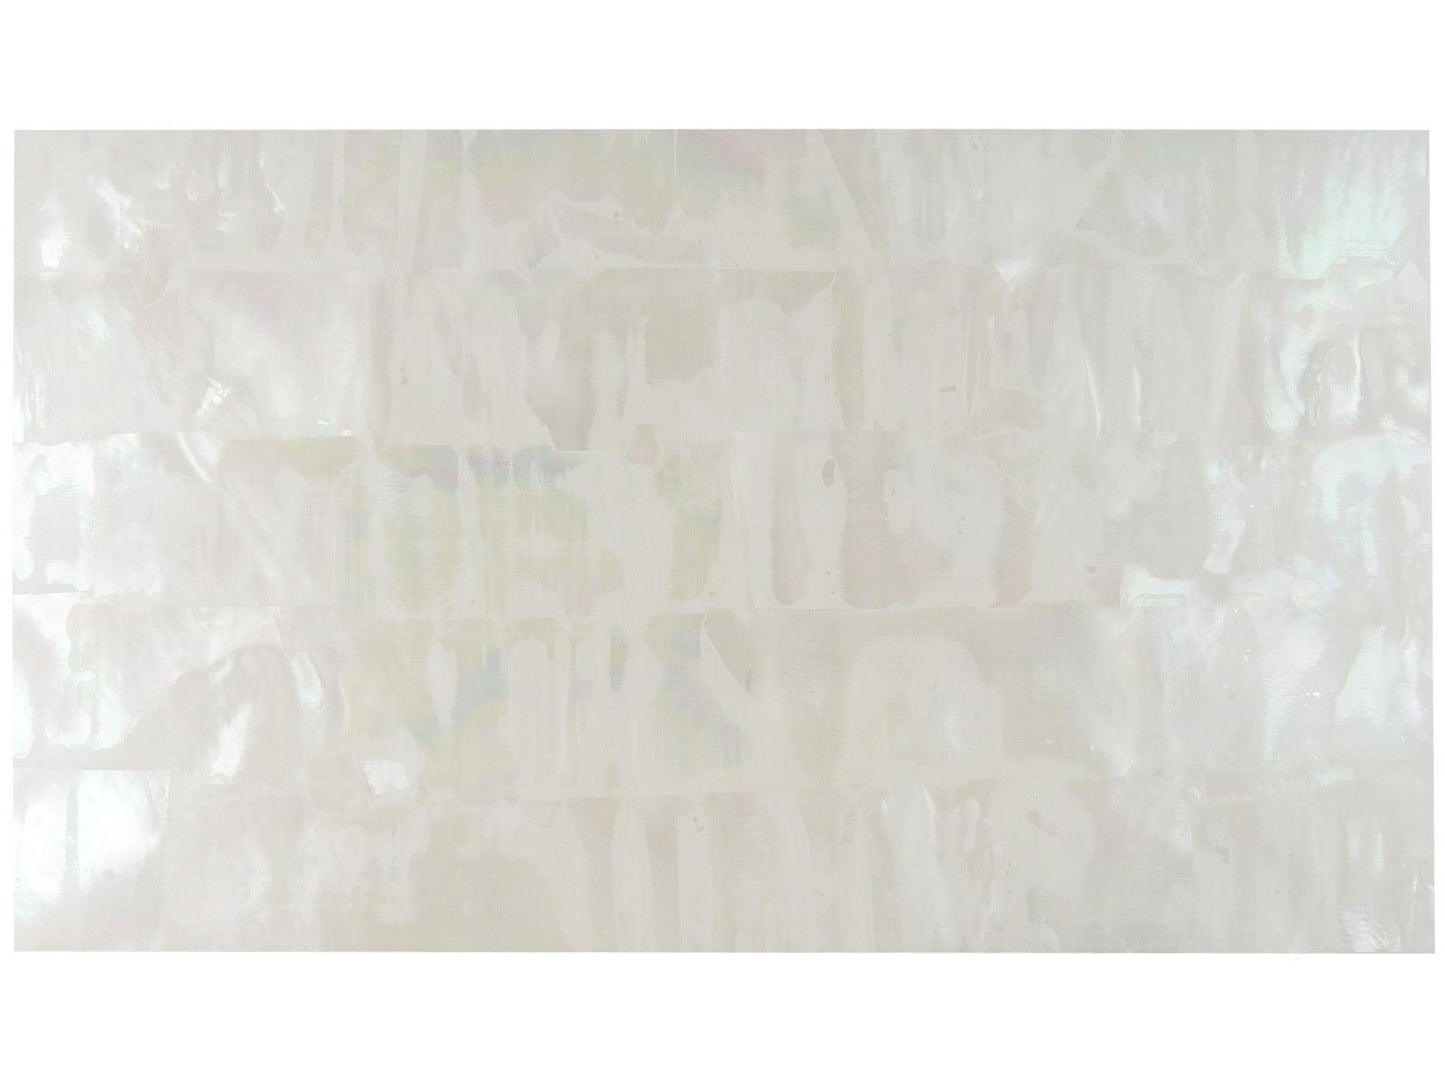 Incudo White Mother of Pearl Laminate Shell Veneer - 240x140x0.15mm